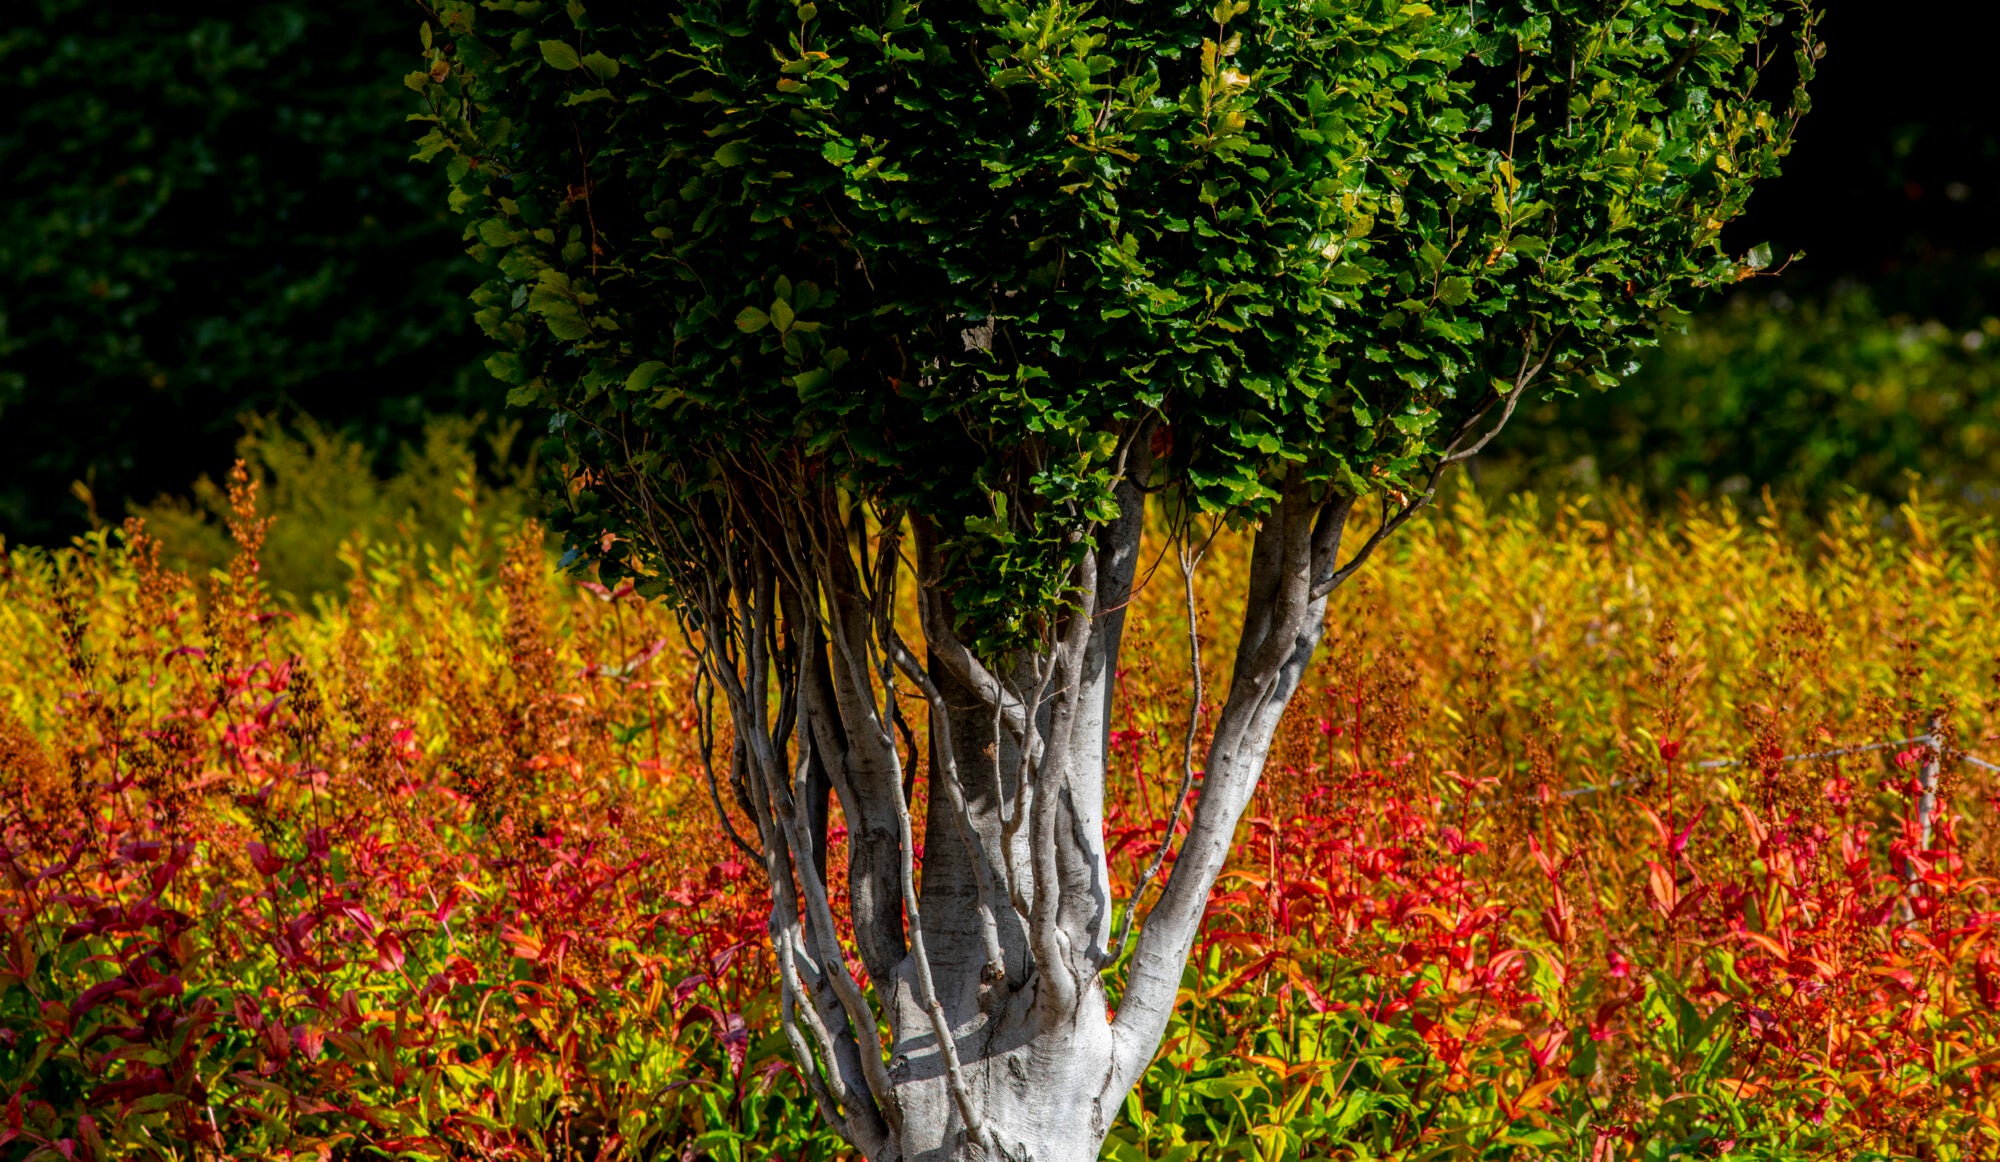 A tree with colorful foliage behind it